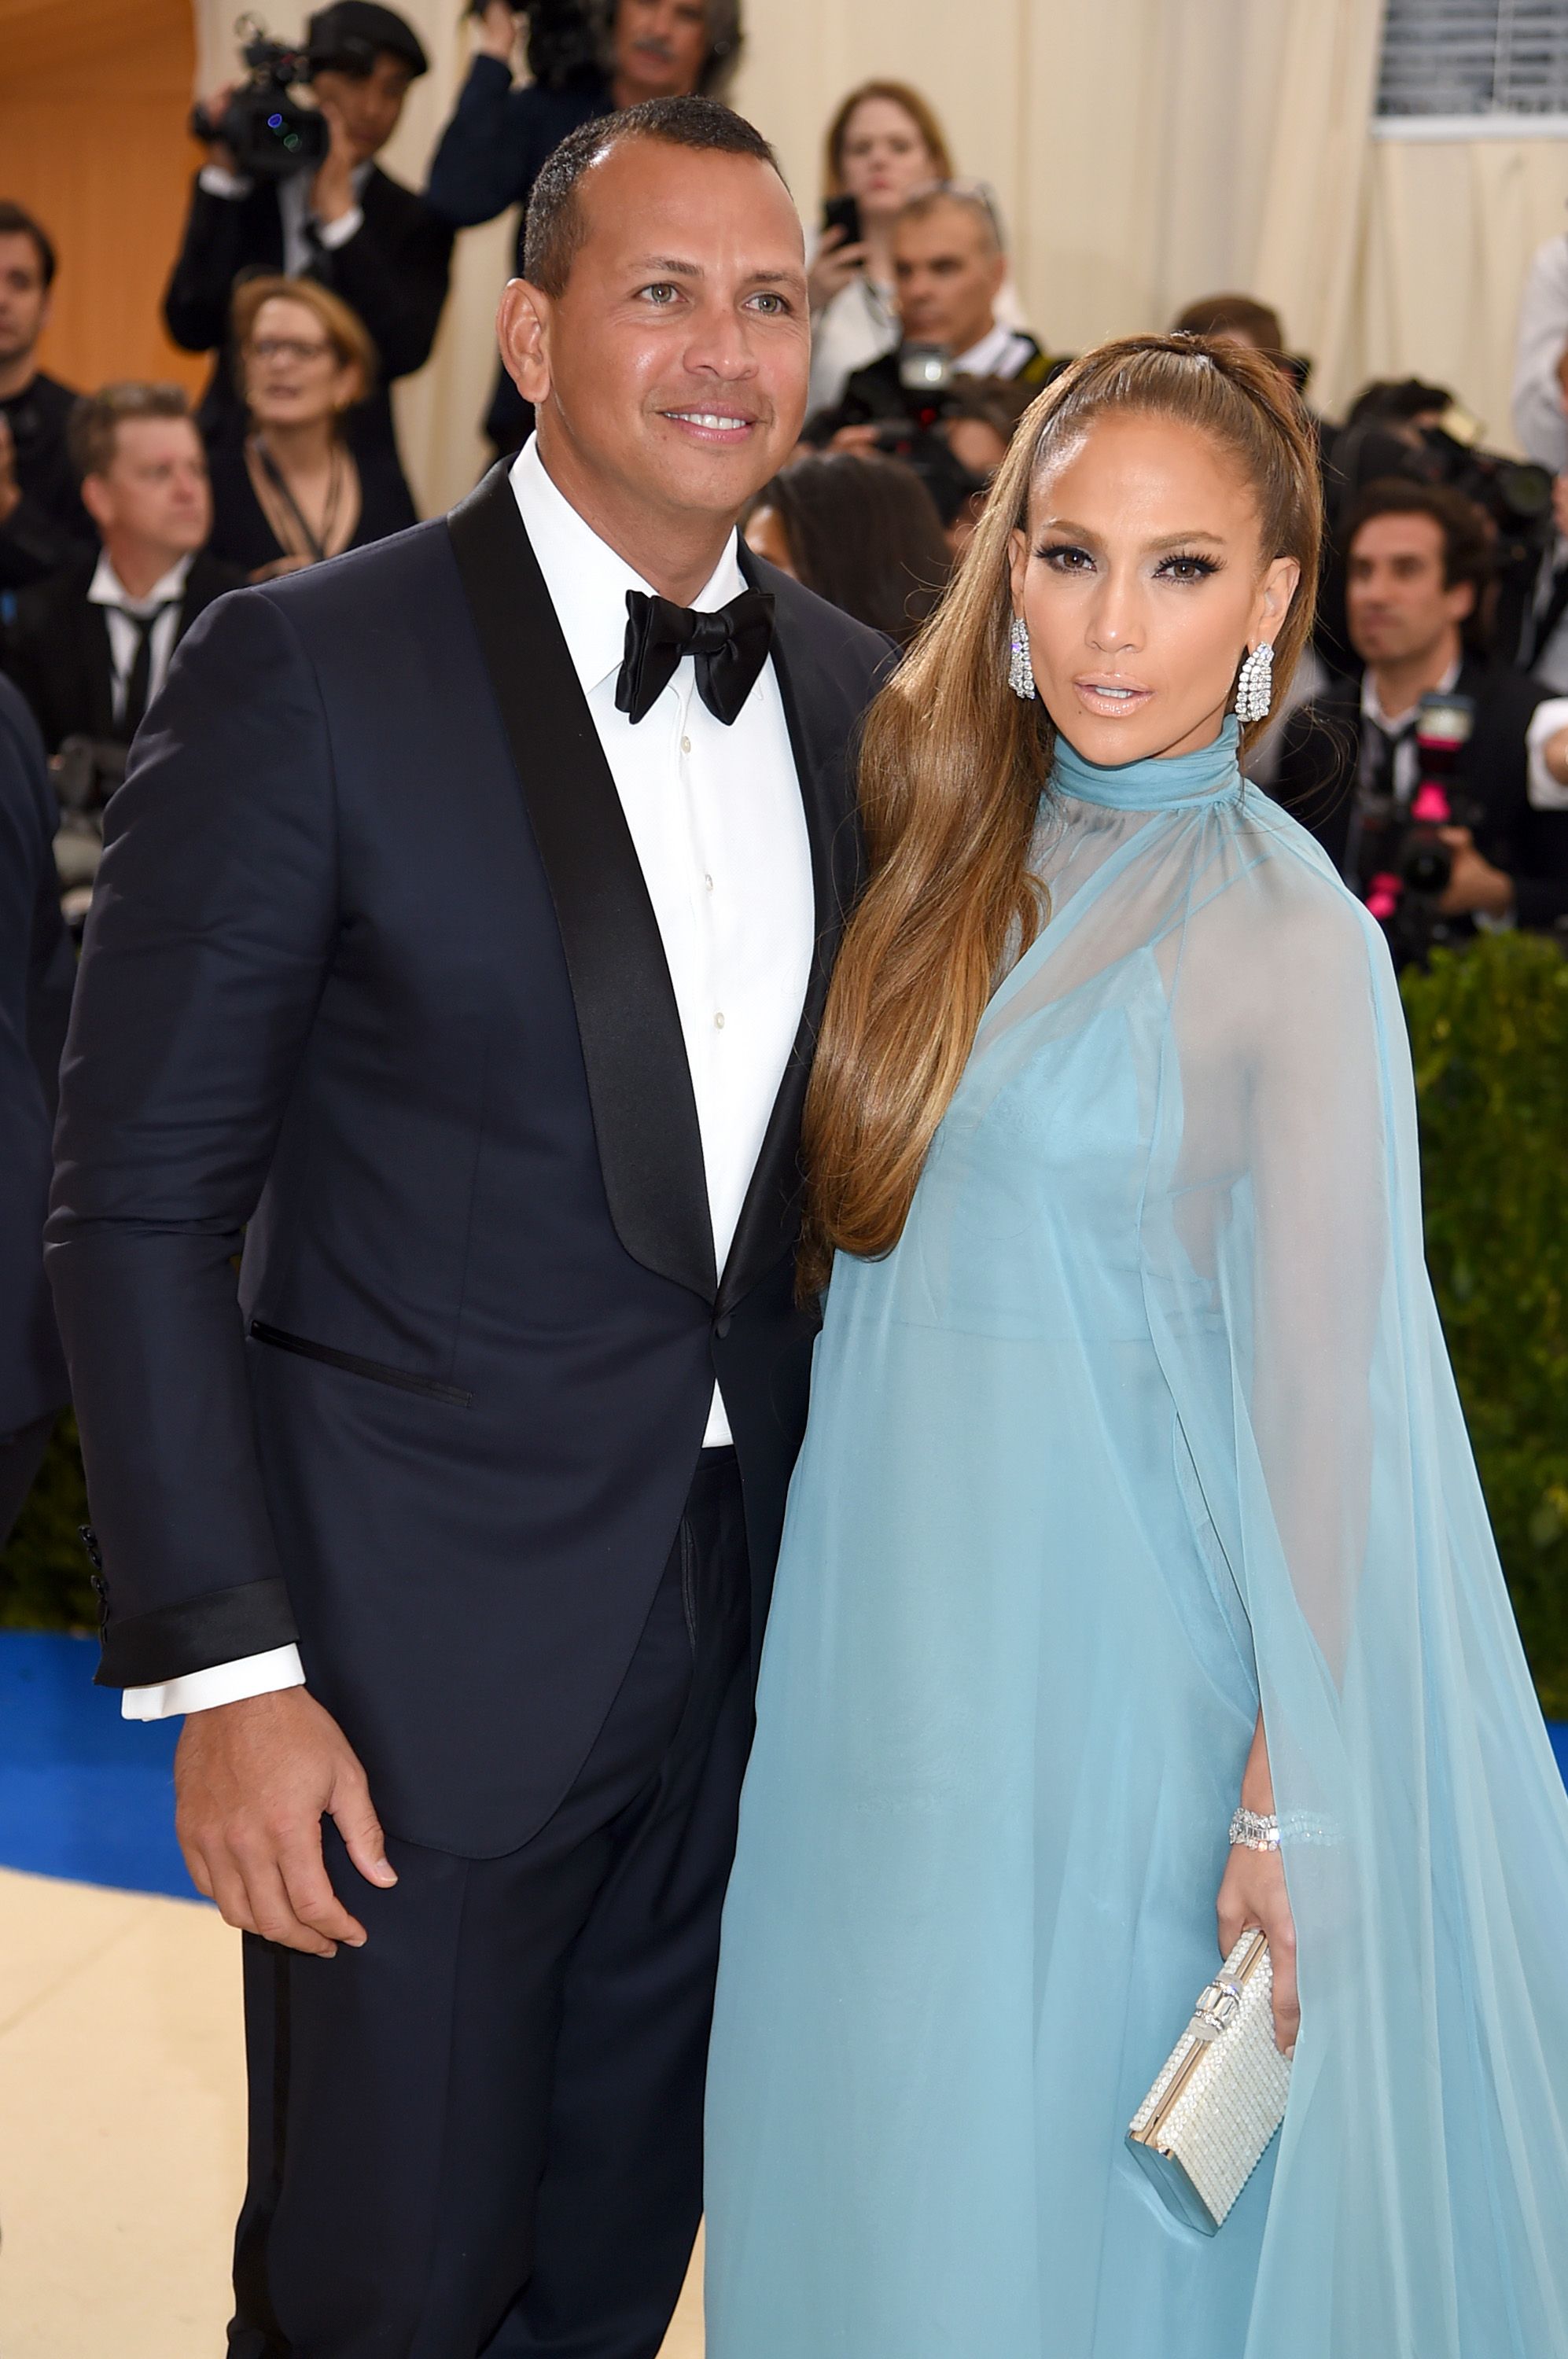 Jennifer Lopez And A-Rod's Marriage Will Last, Per Astrology